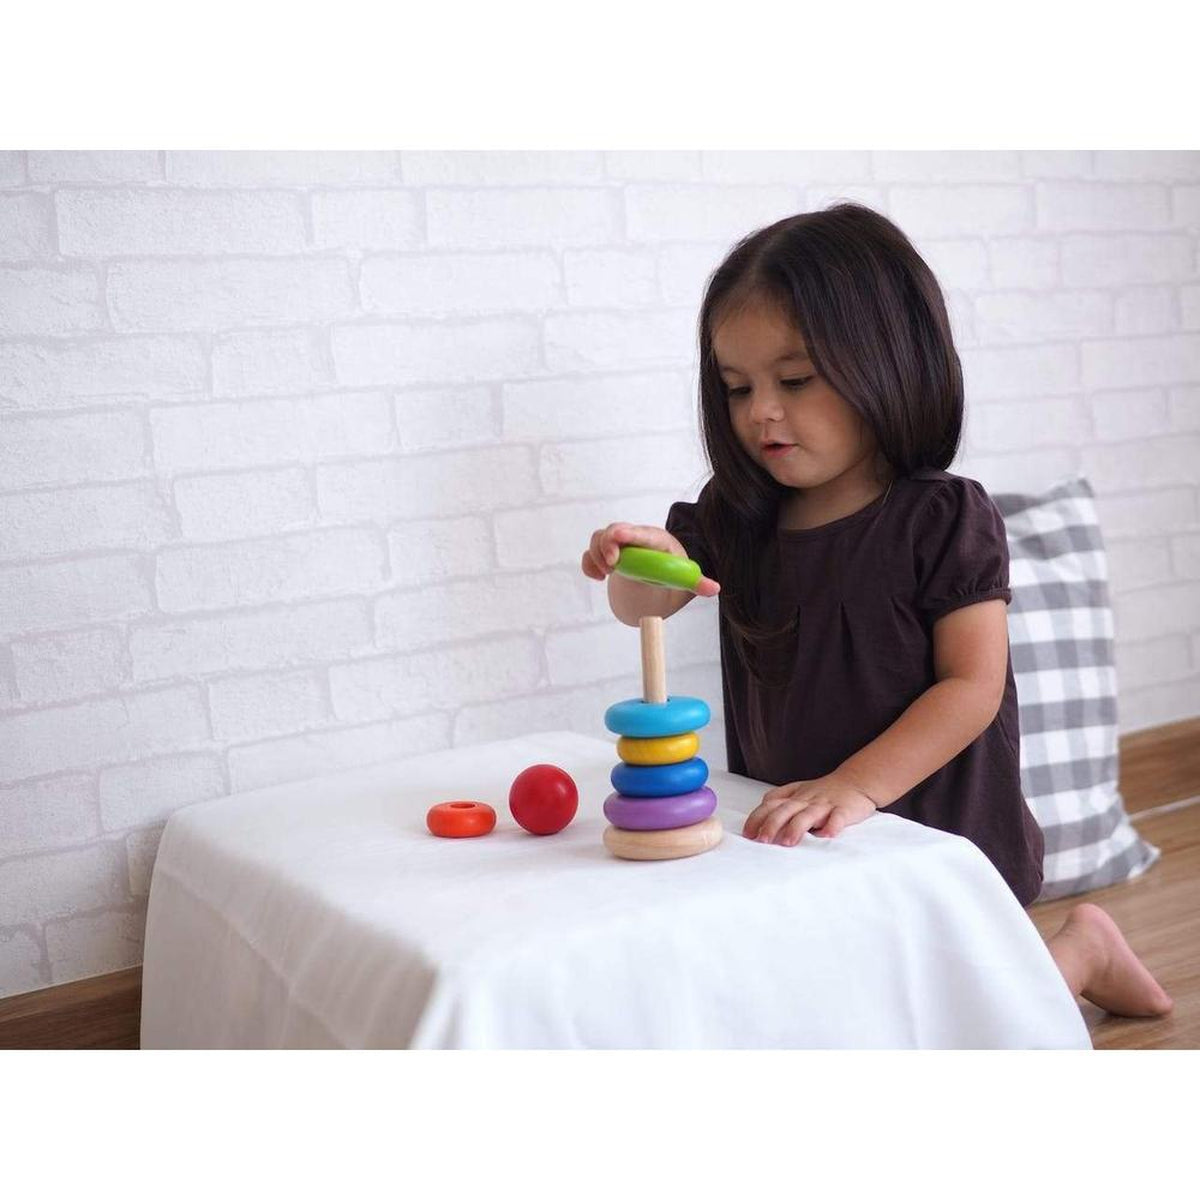 Amazon.com: PlanToys Wooden 8 Piece Sorting and Stacking Ring Toy (5124) |  Rainbow Color Collection |Sustainably Made from Rubberwood and Non-Toxic  Paints and Dyes : Toys & Games